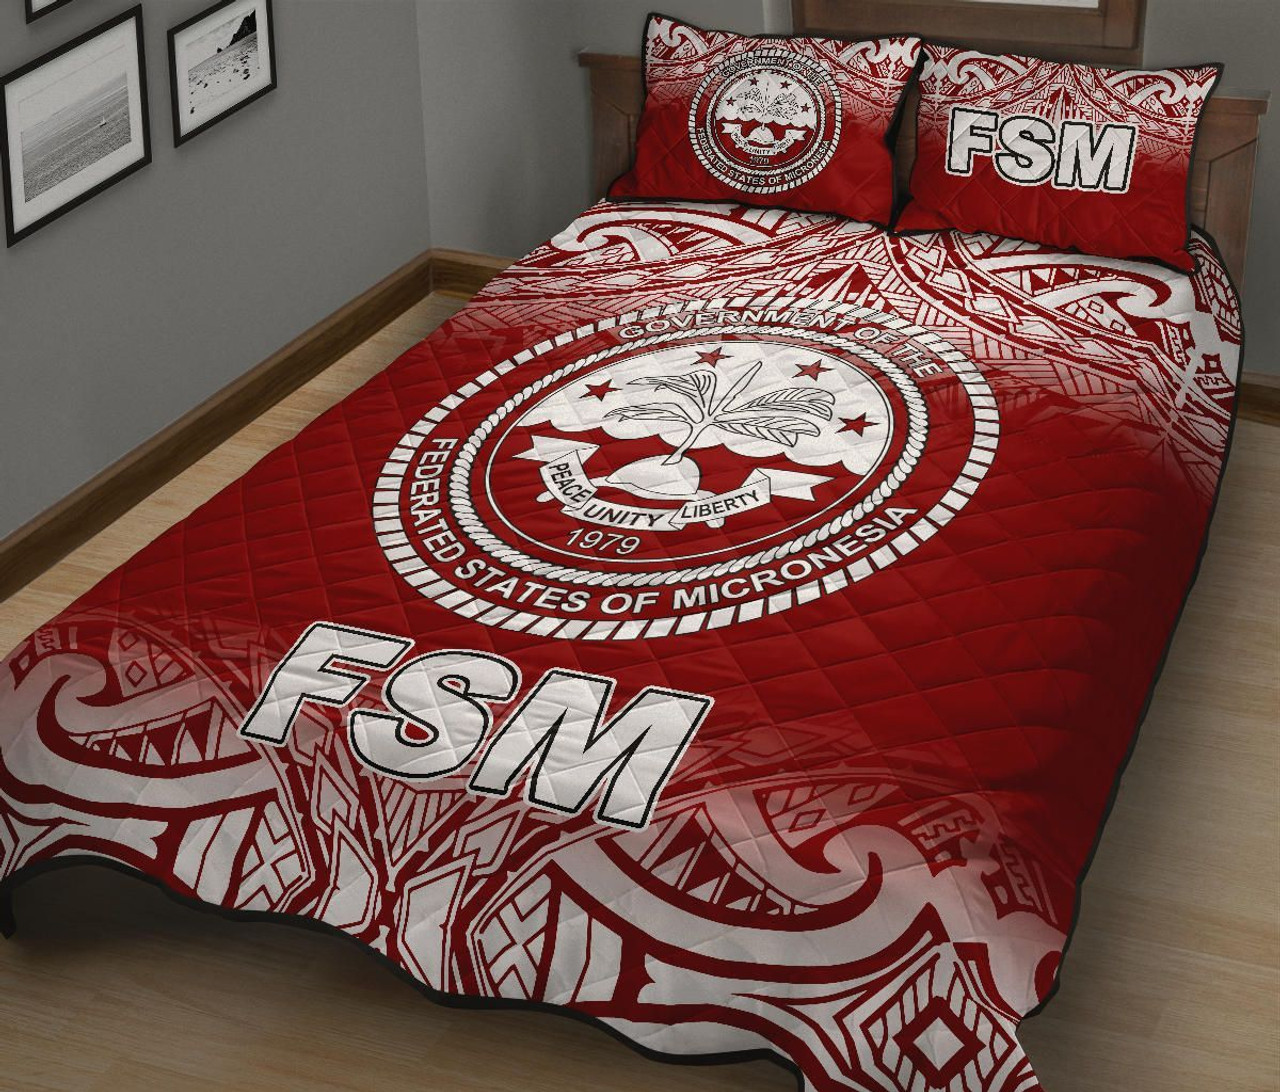 Federated States of Micronesia Quilt Bed Set - Federated States of Micronesia Seal Red Fog Style 3